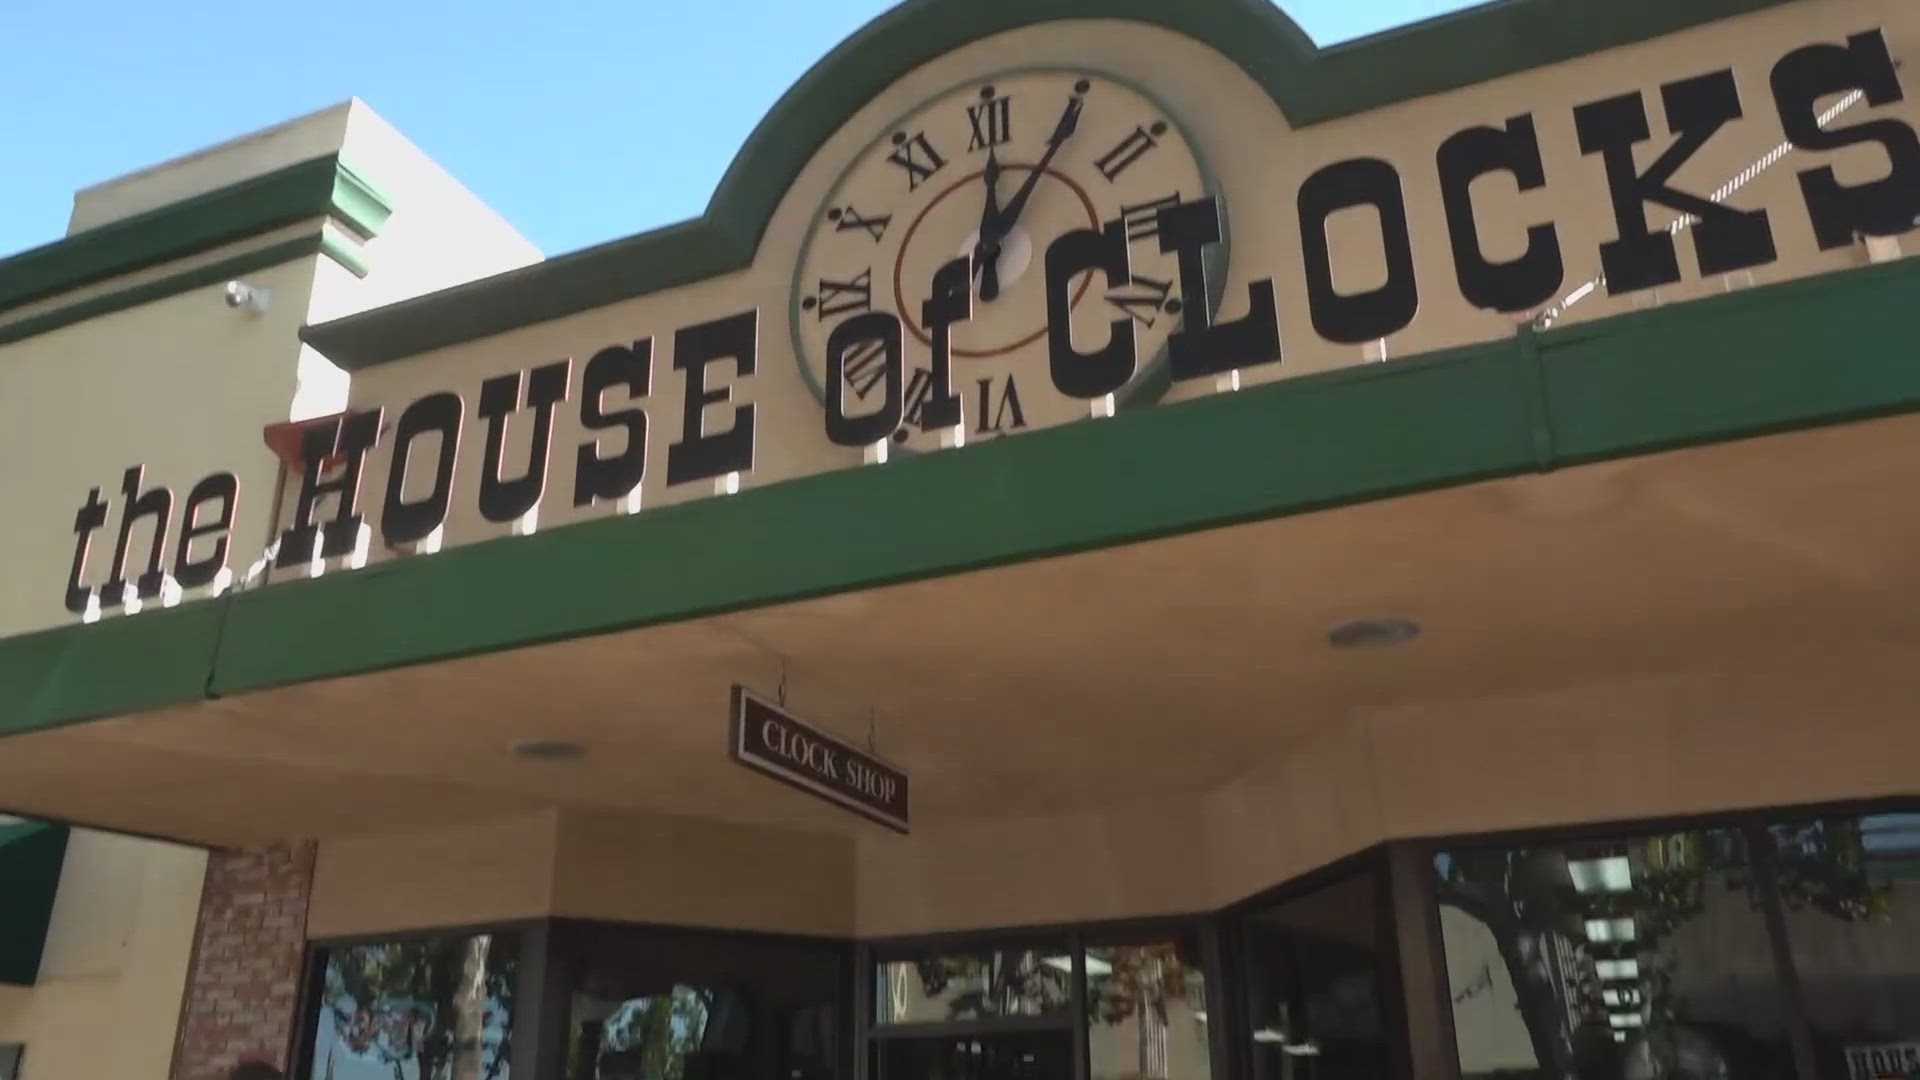 Lodi clock store prepares for the end of daylight saving time